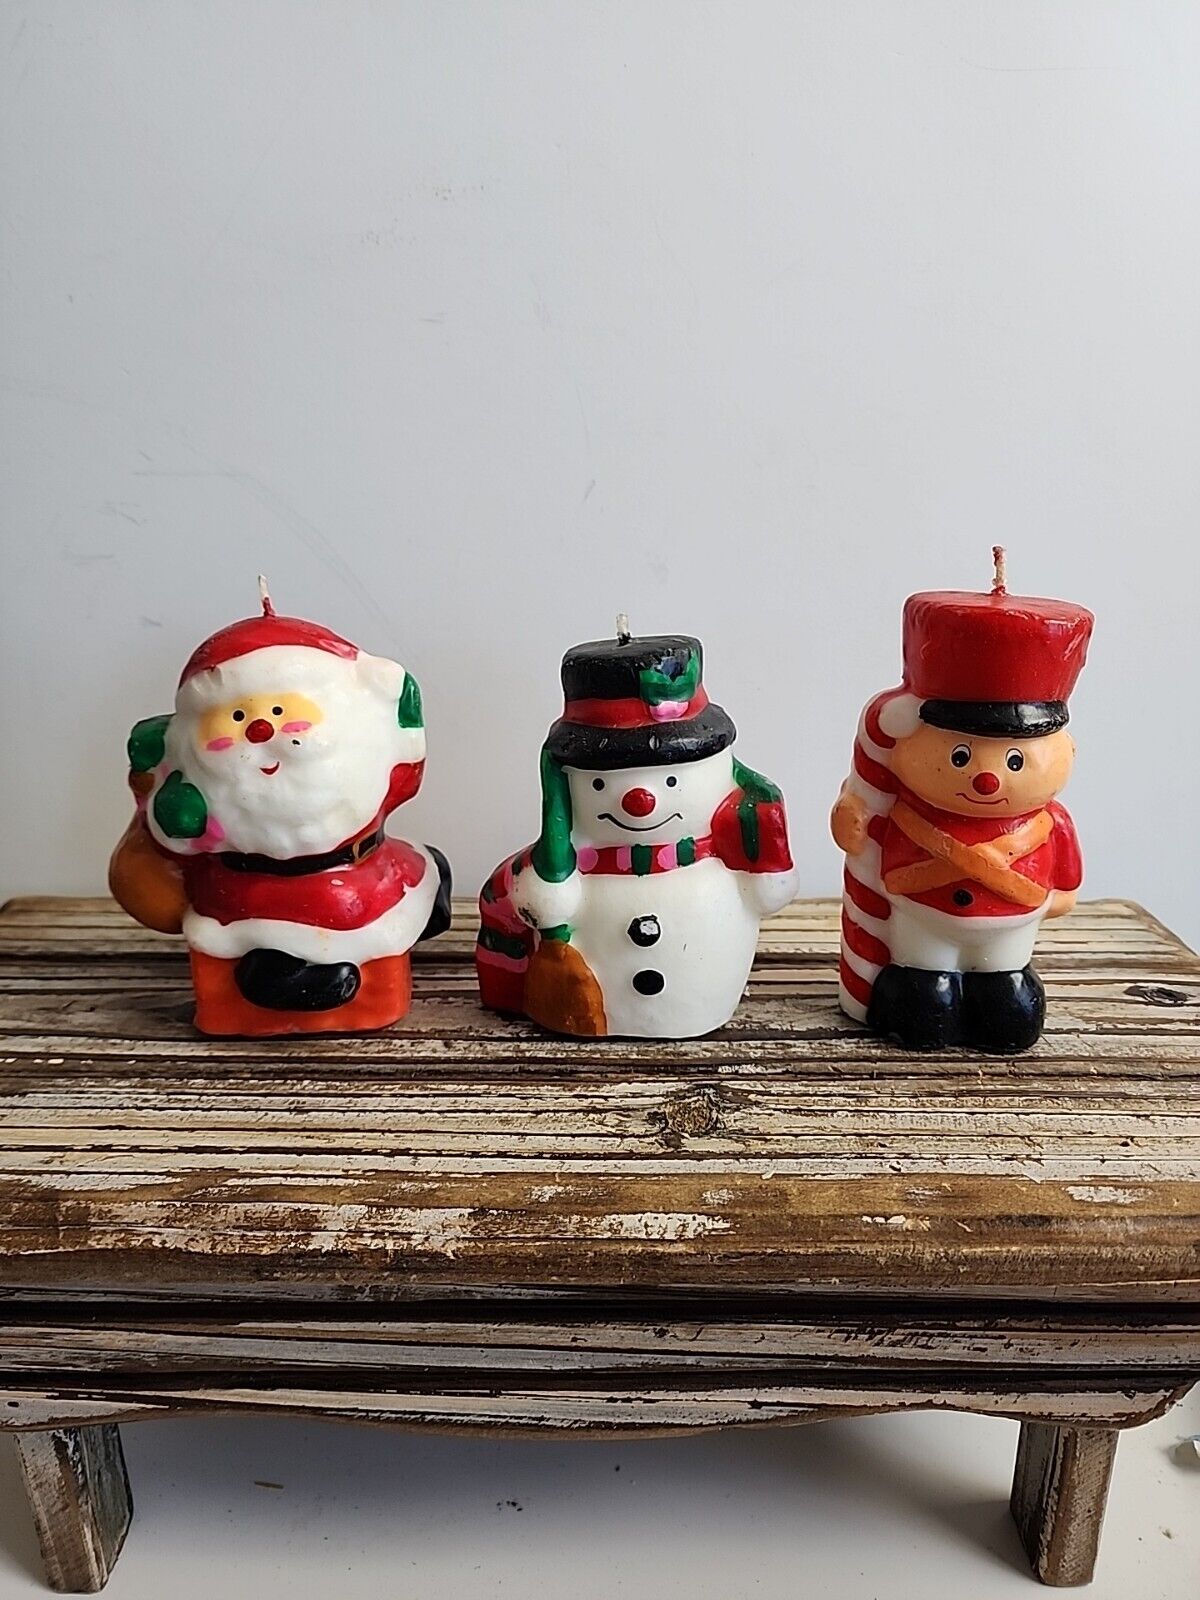 Lot of 3 vintage shaped candles (1 snowman, 1 Santa, and 1 Toy Soldier)